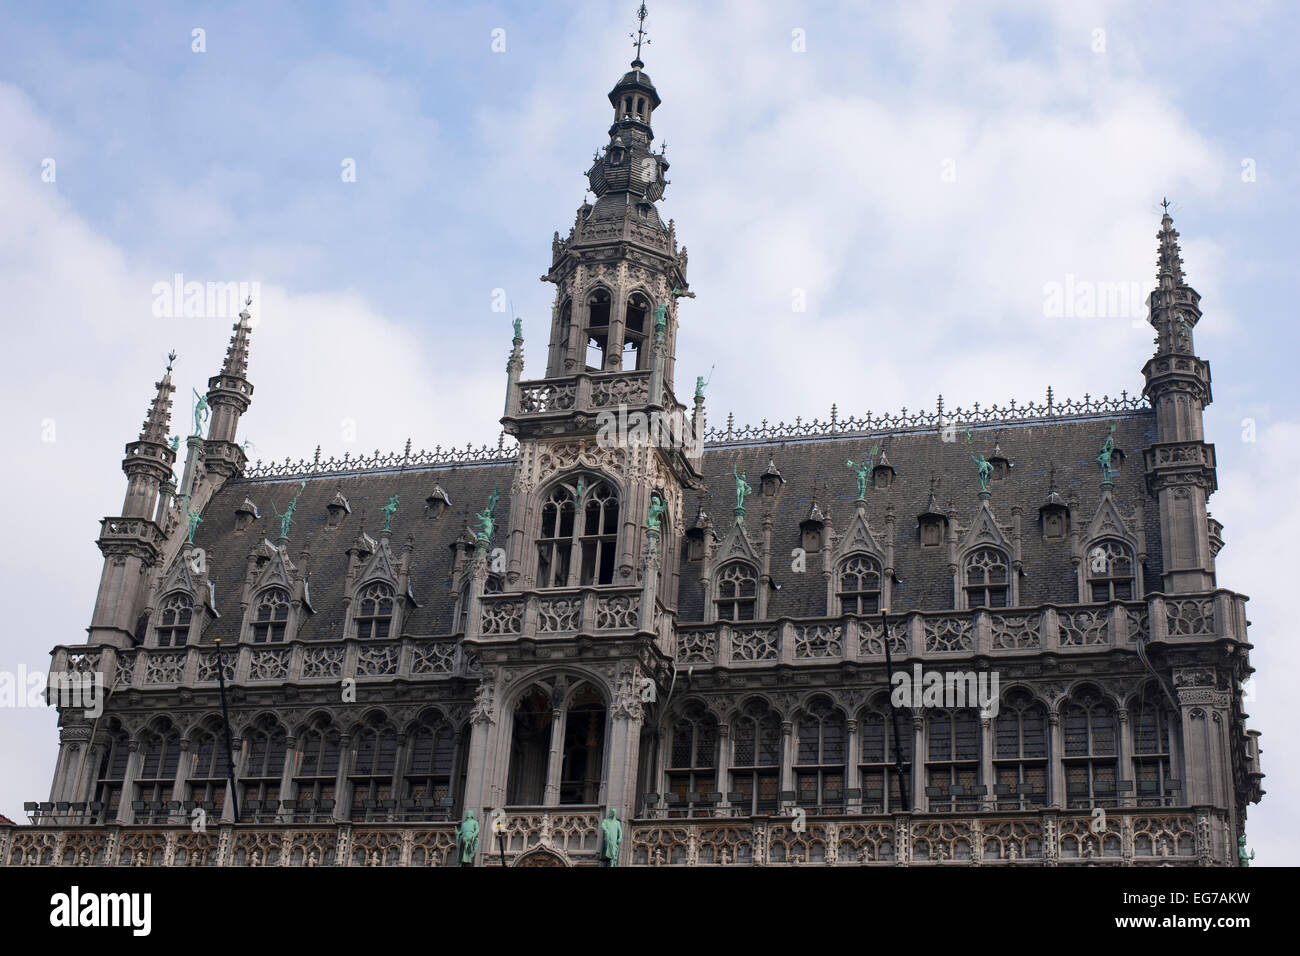 The Maison du Roi (King's House), or Broodhuis (Breadhouse) on The Grand Place (Grote Markt) in Brussels Stock Photo